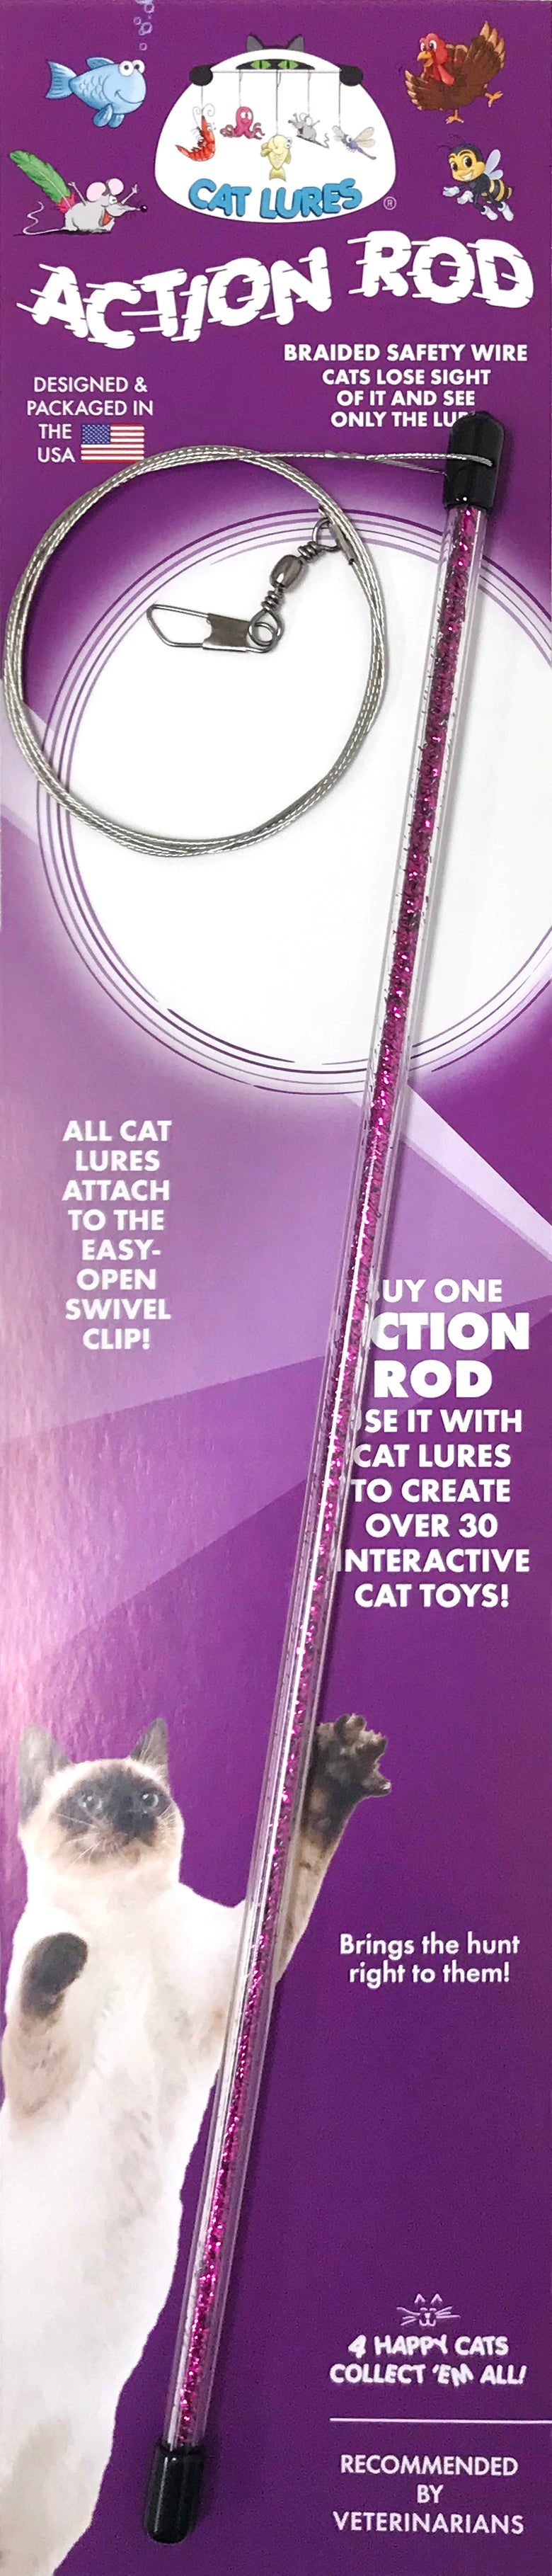 CAT LURES Action Rod